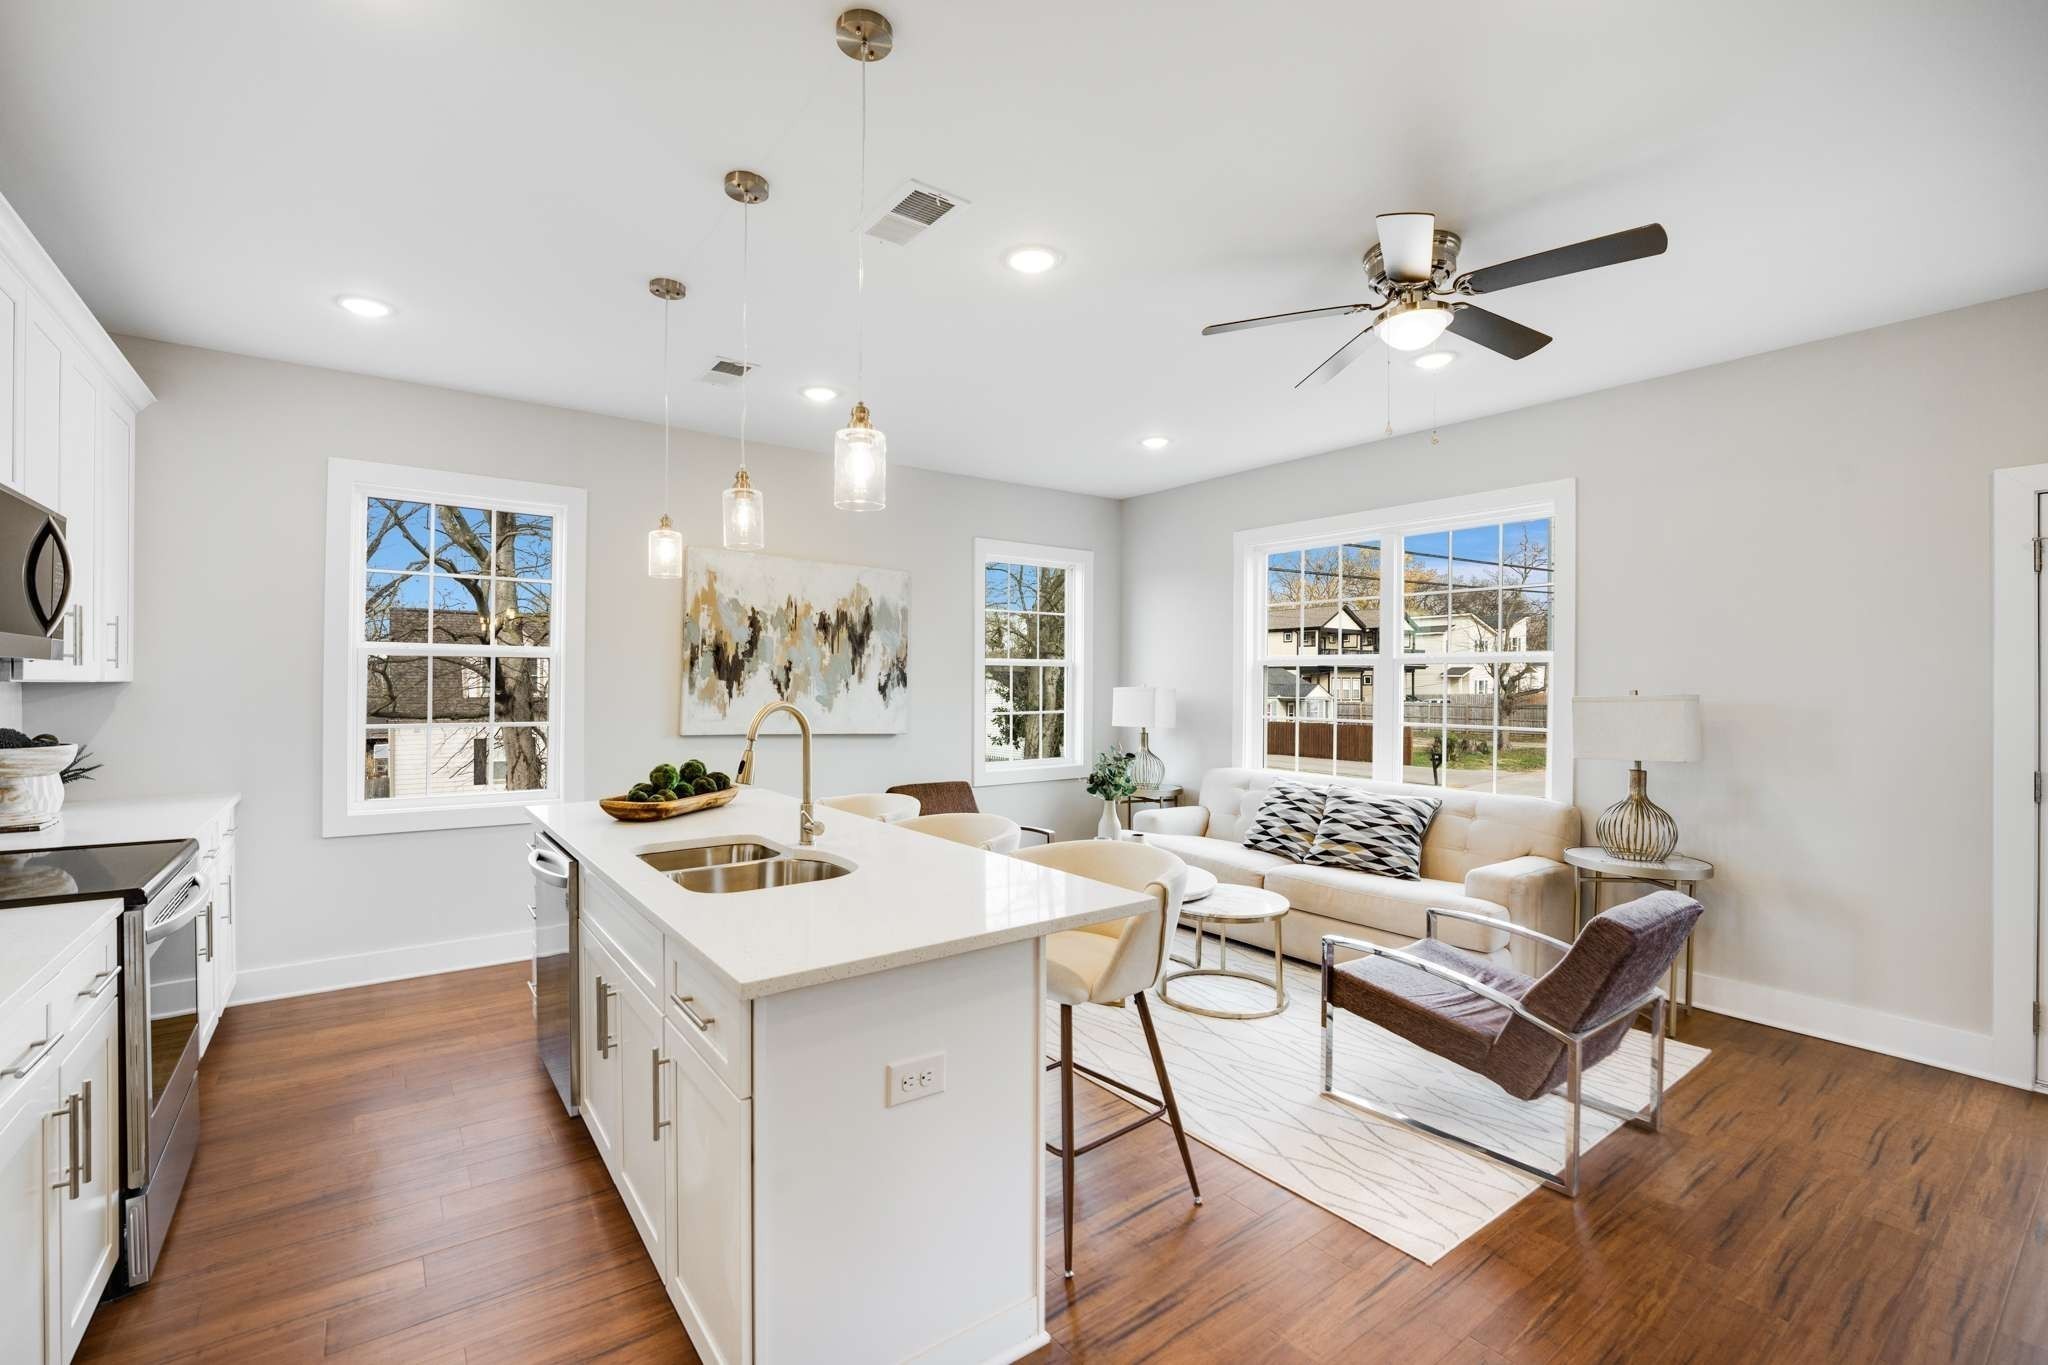 a living room with stainless steel appliances kitchen island hardwood floor and a window